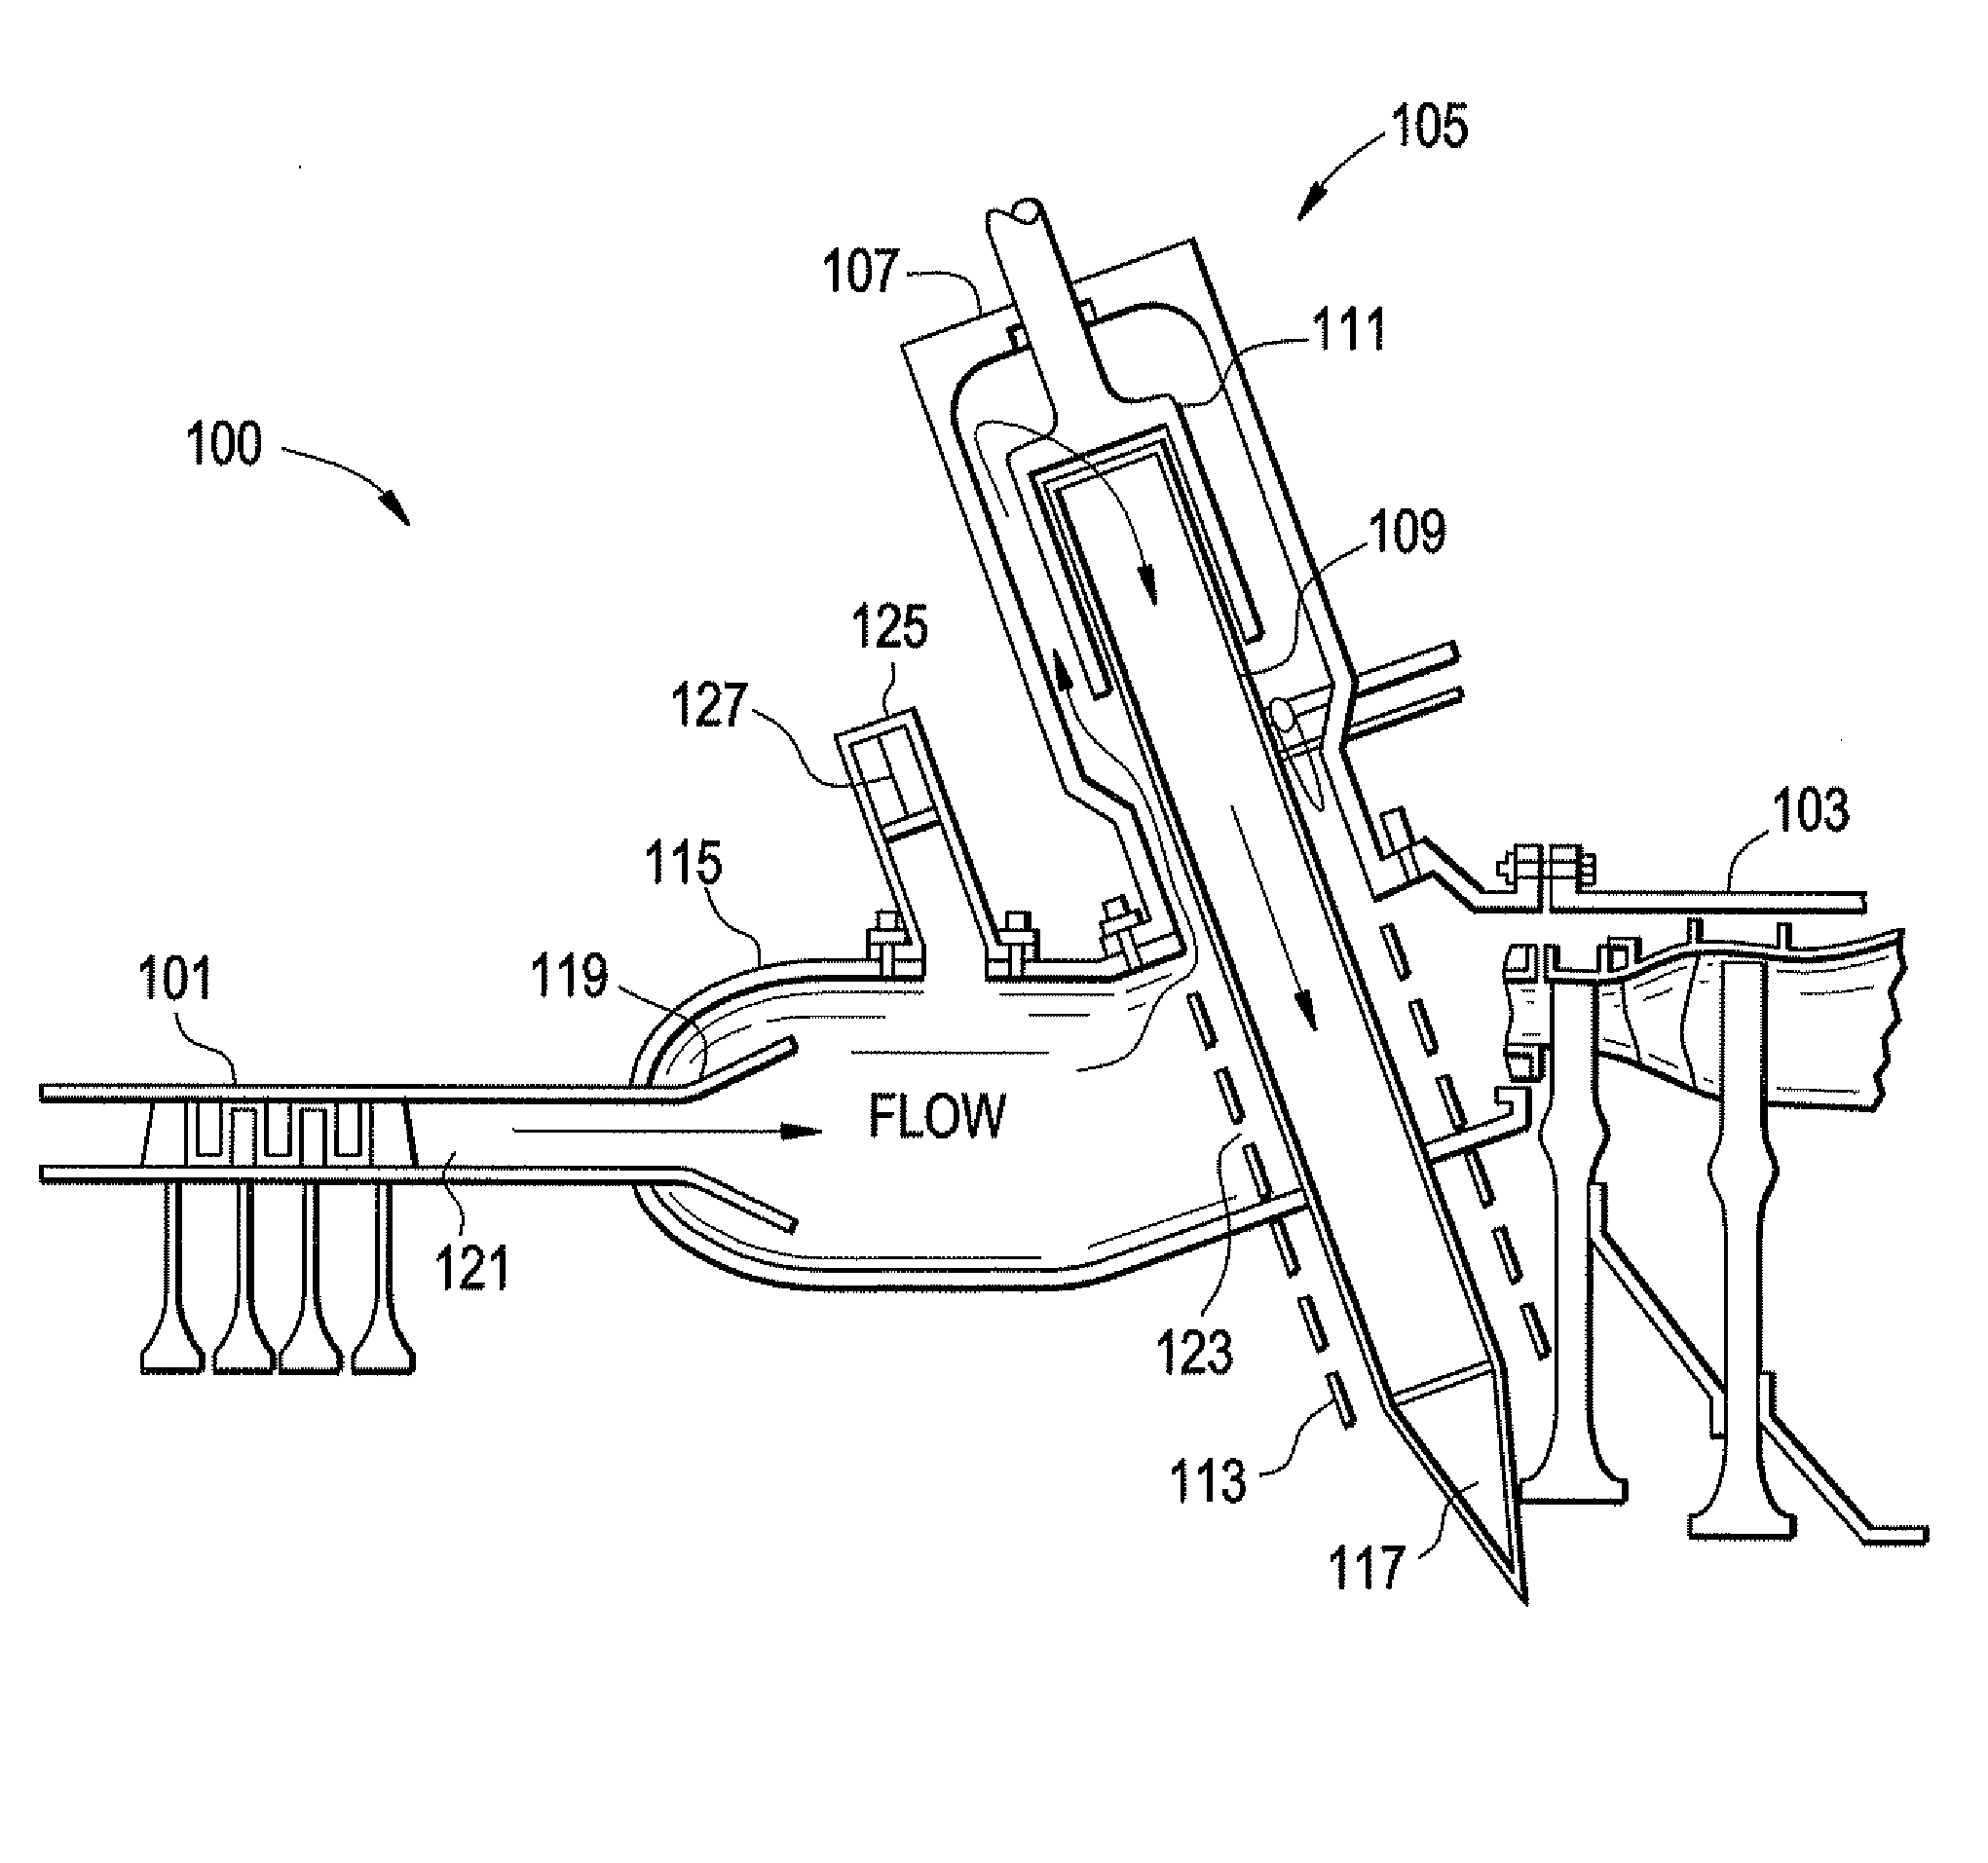 Multi-tube, can-annular pulse detonation combustor based engine with tangentially and longitudinally angled pulse detonation combustors